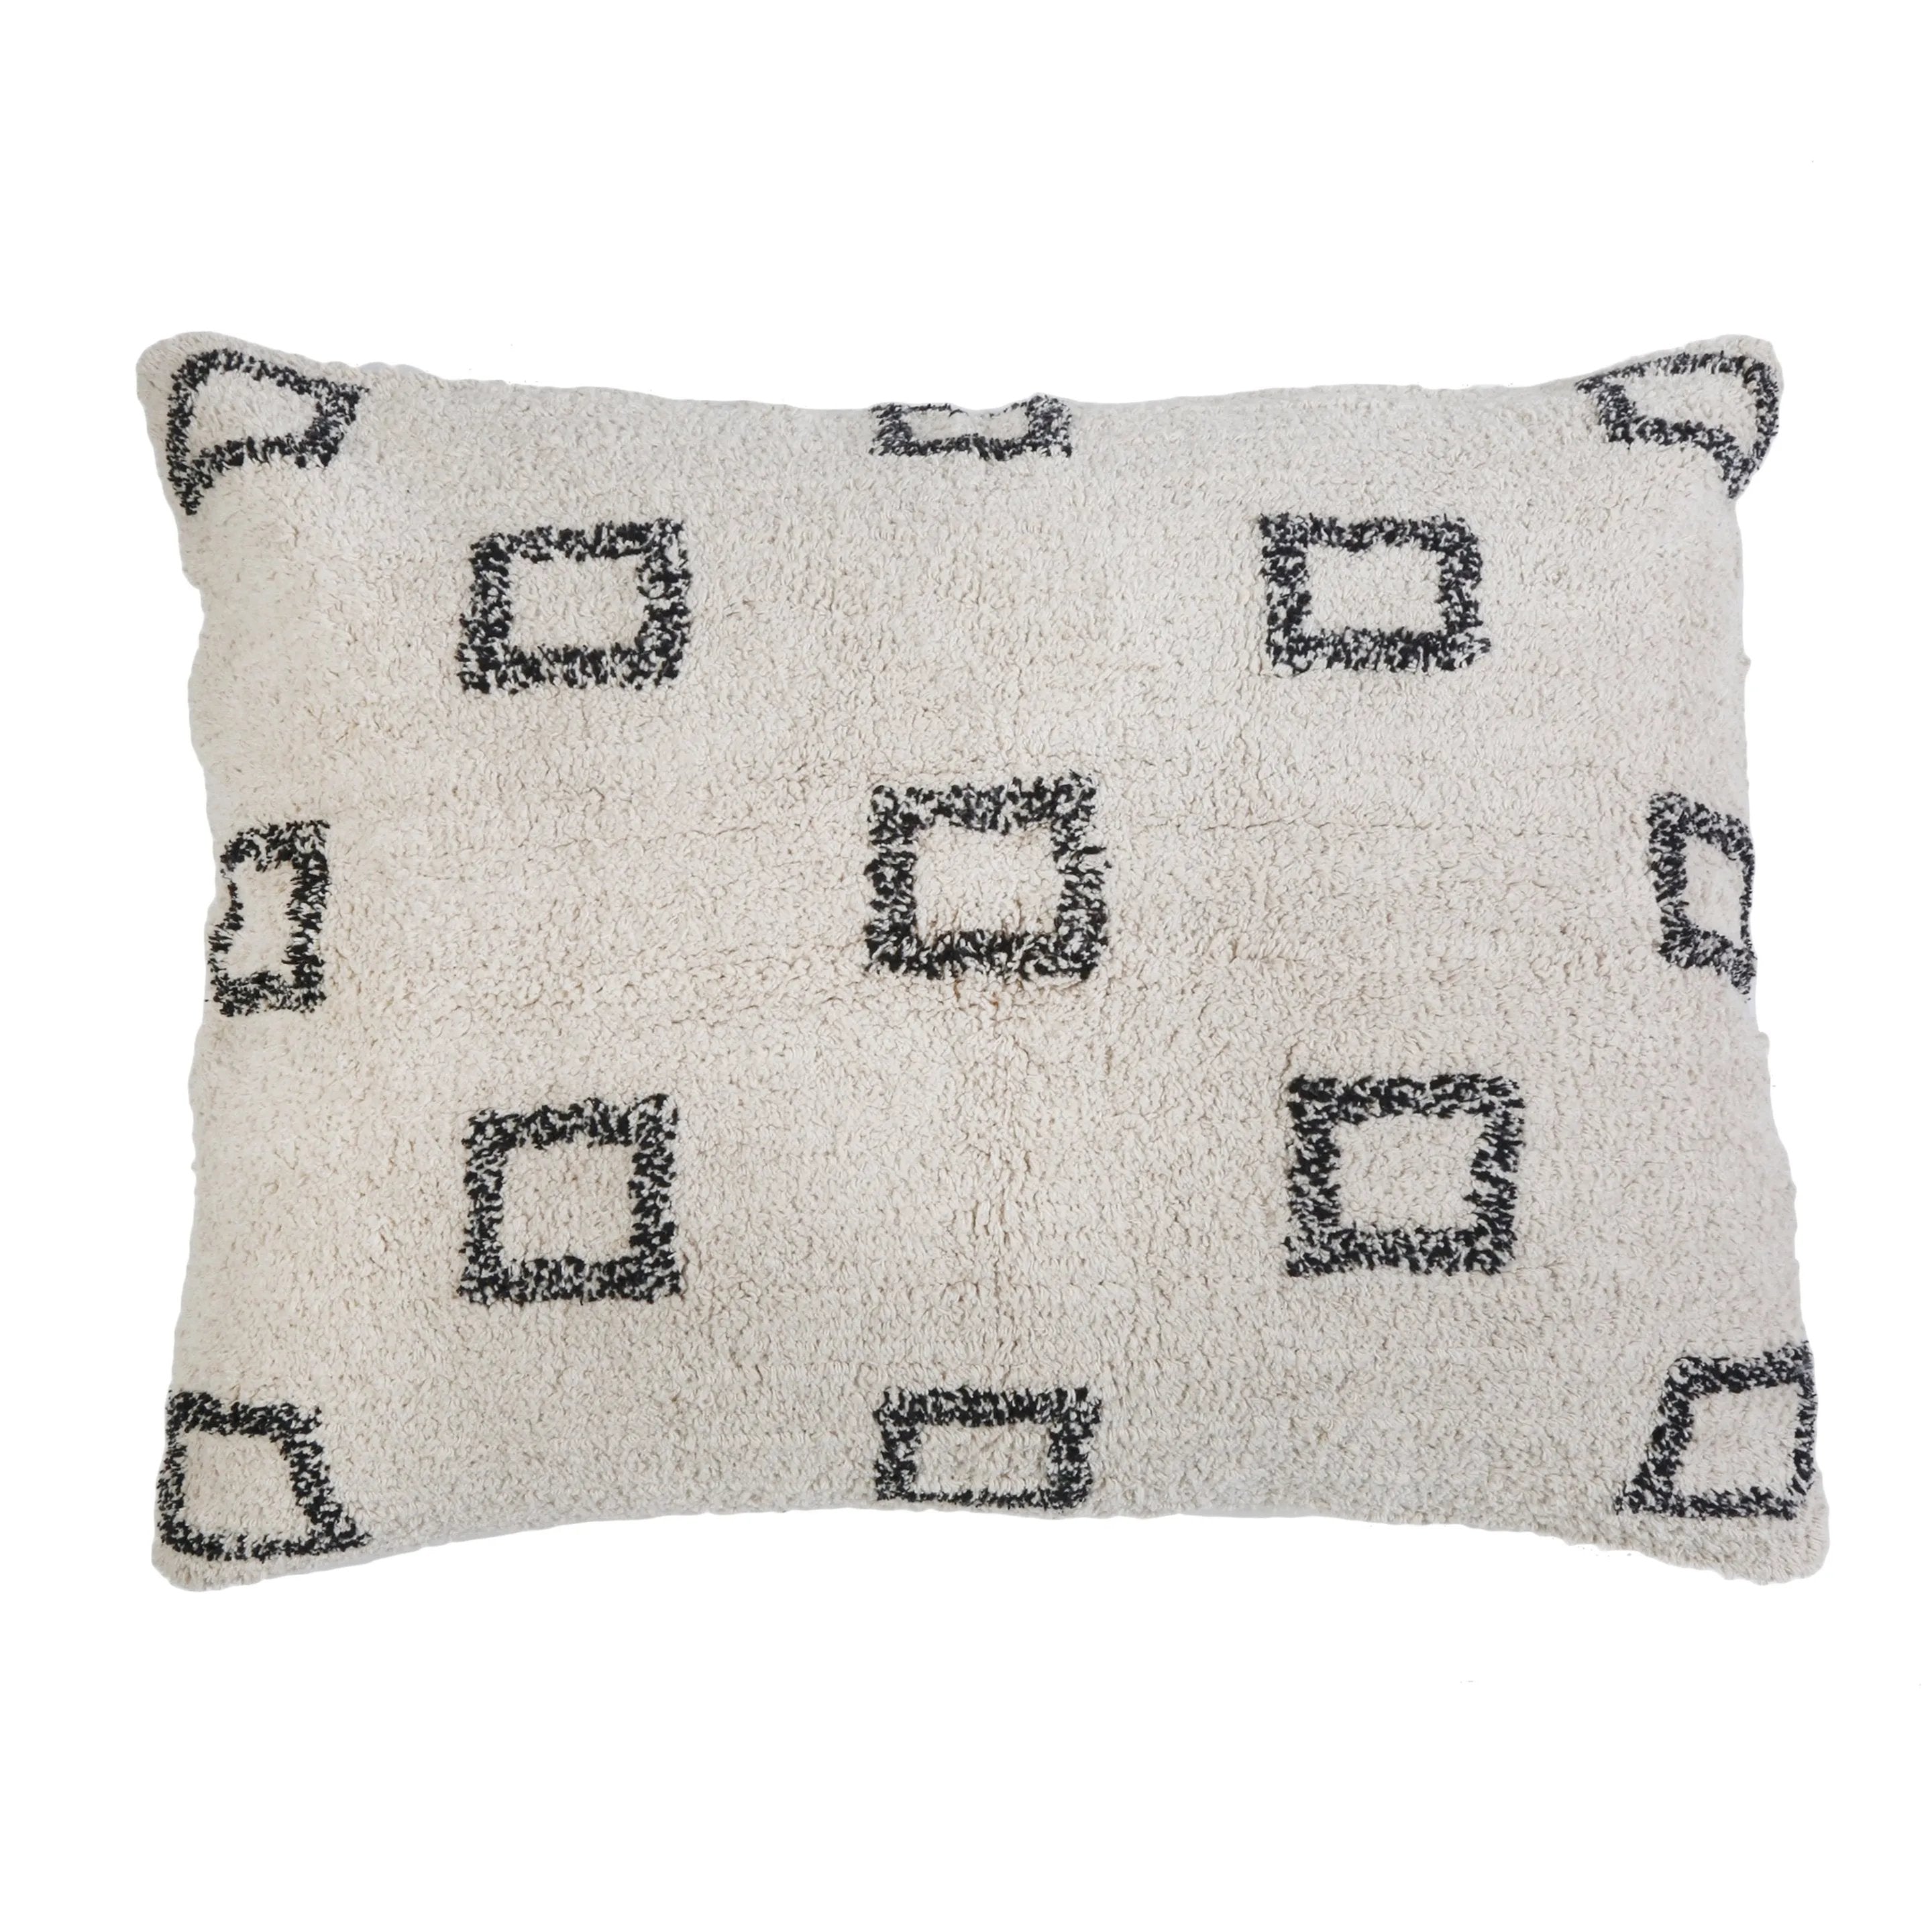 Soft and plush this oversized, hand-woven shag pillow adds a touch of boho to your bedroom or home. Featuring a repeating pattern of charcoal boxes, this pillow is one of our most popular items ever Amethyst Home provides interior design, new home construction design consulting, vintage area rugs, and lighting in the Boston metro area.